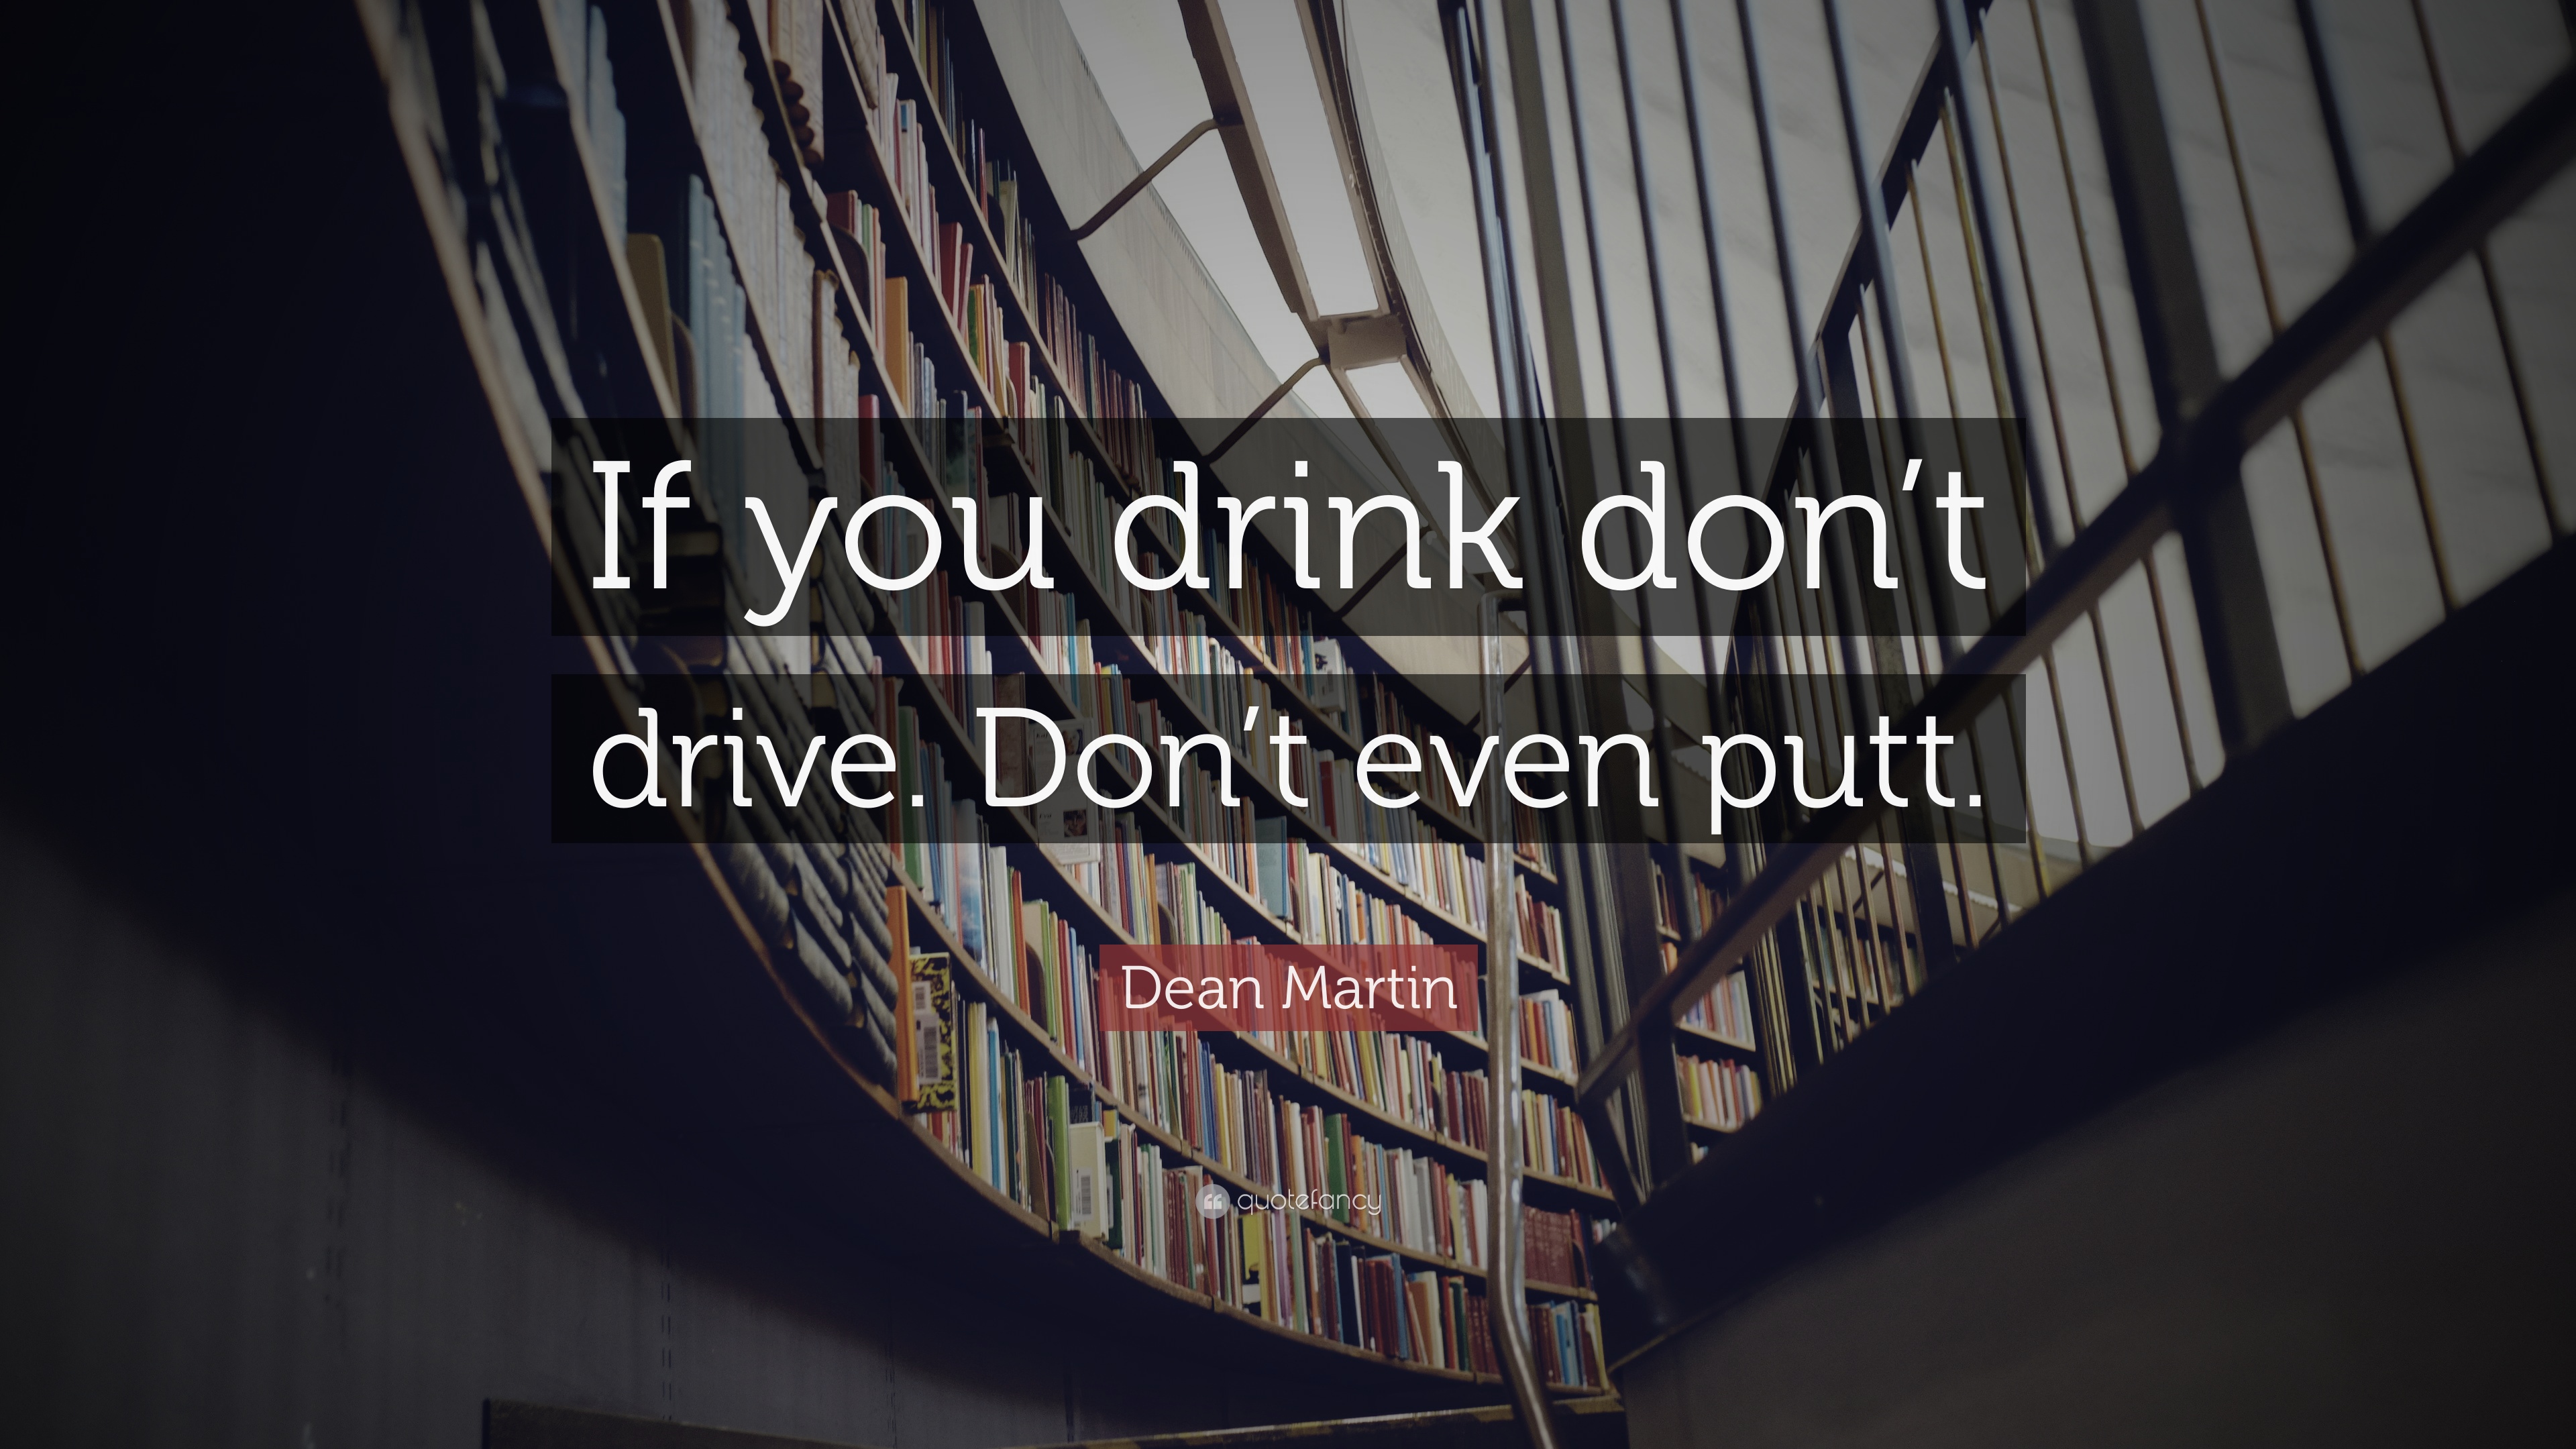 Dean Martin Quote: “If you drink don't drive. Don't even putt.” 9